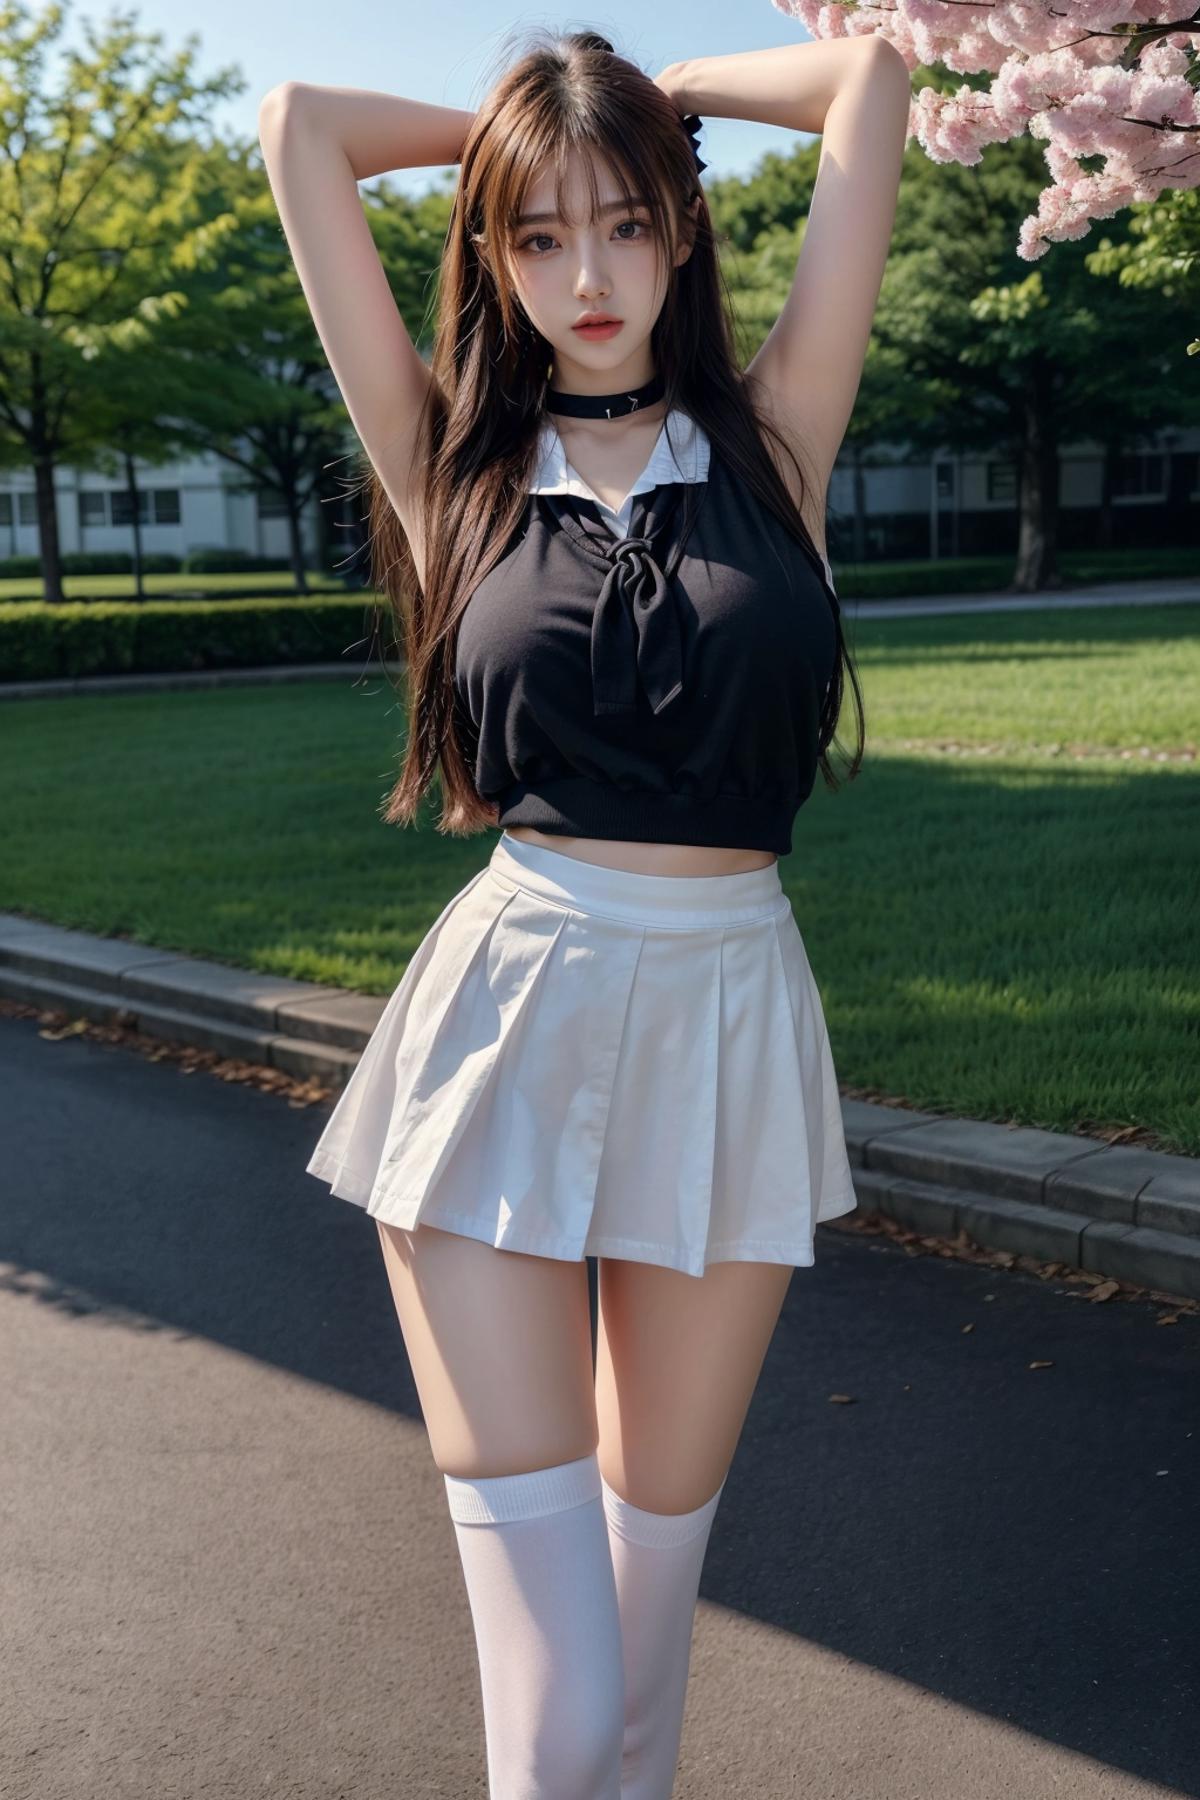 A young woman wearing a black shirt and white skirt strikes a pose.